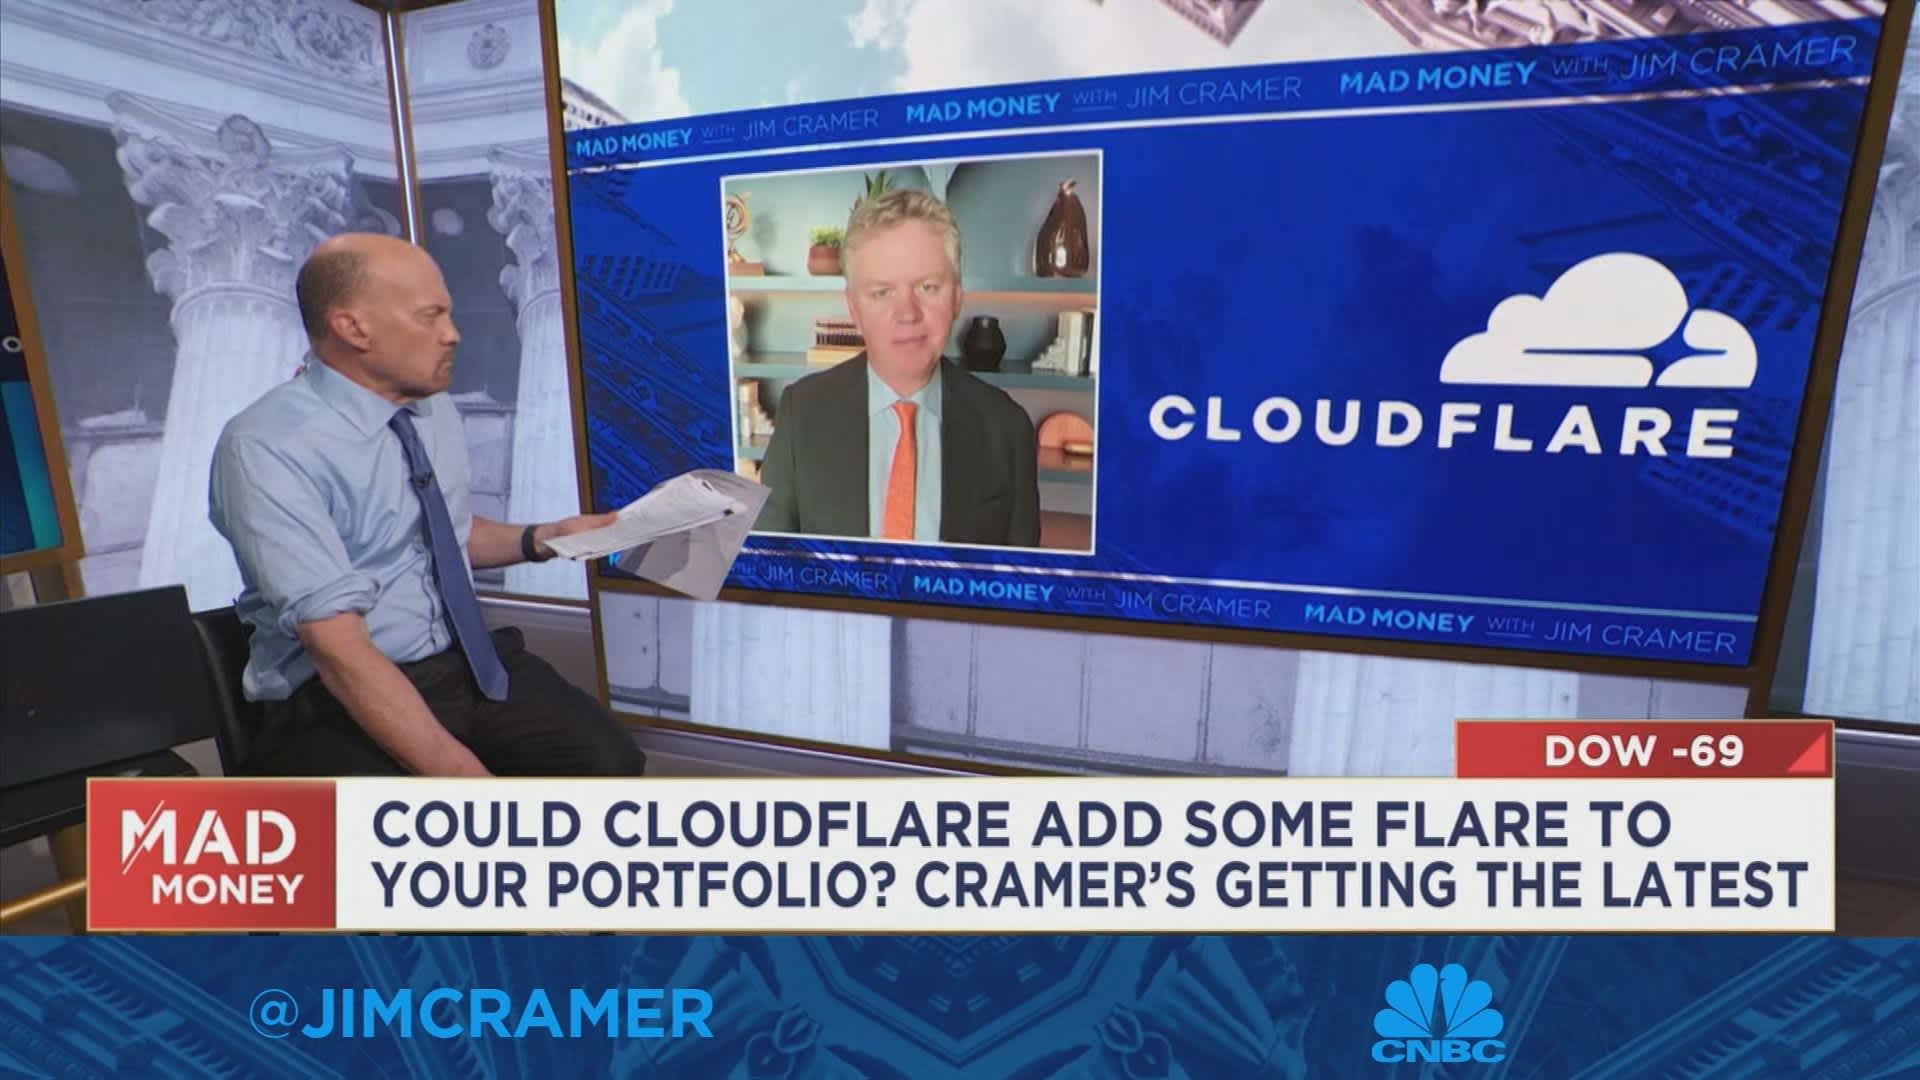 Cloudflare CEO Matthew Prince goes one-on-one with Jim Cramer